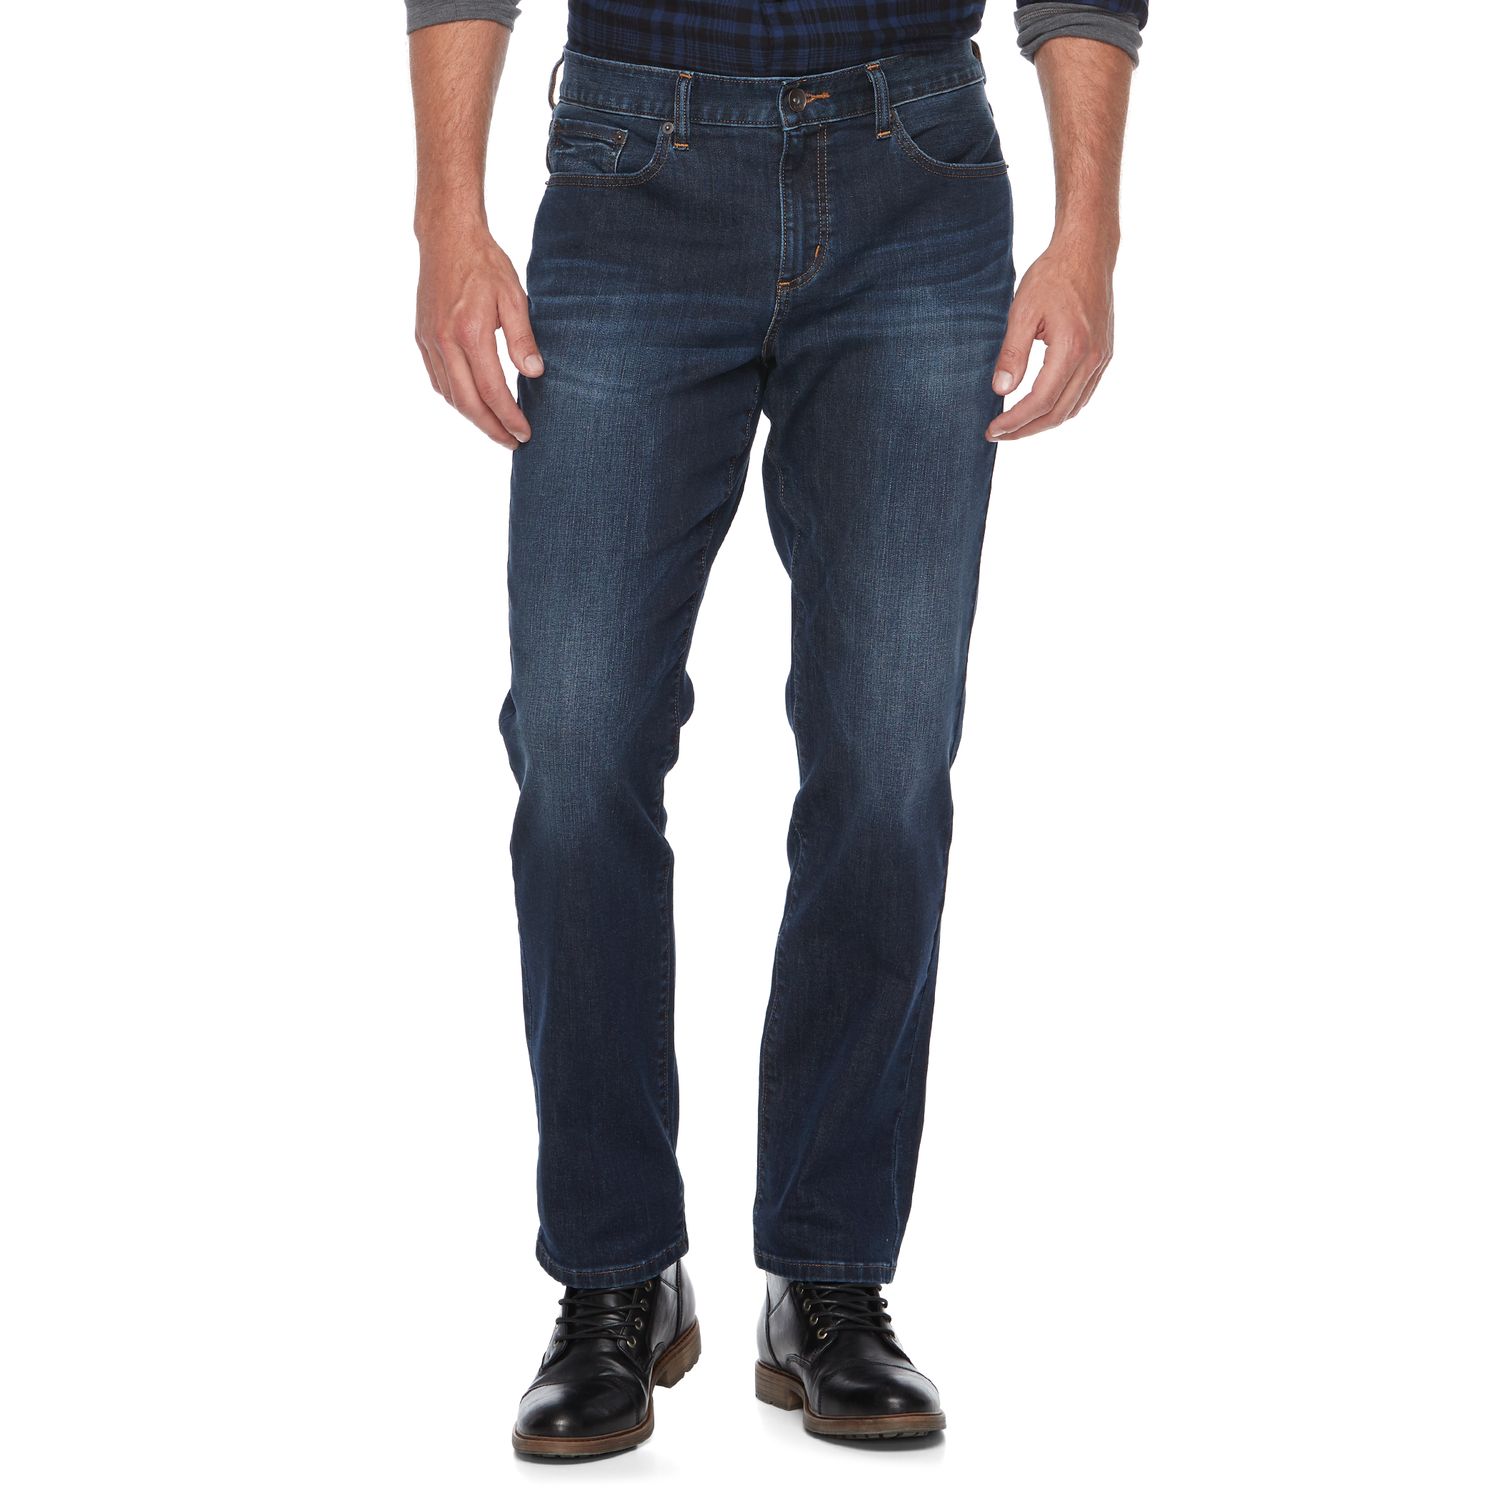 apt 9 men's relaxed fit jeans